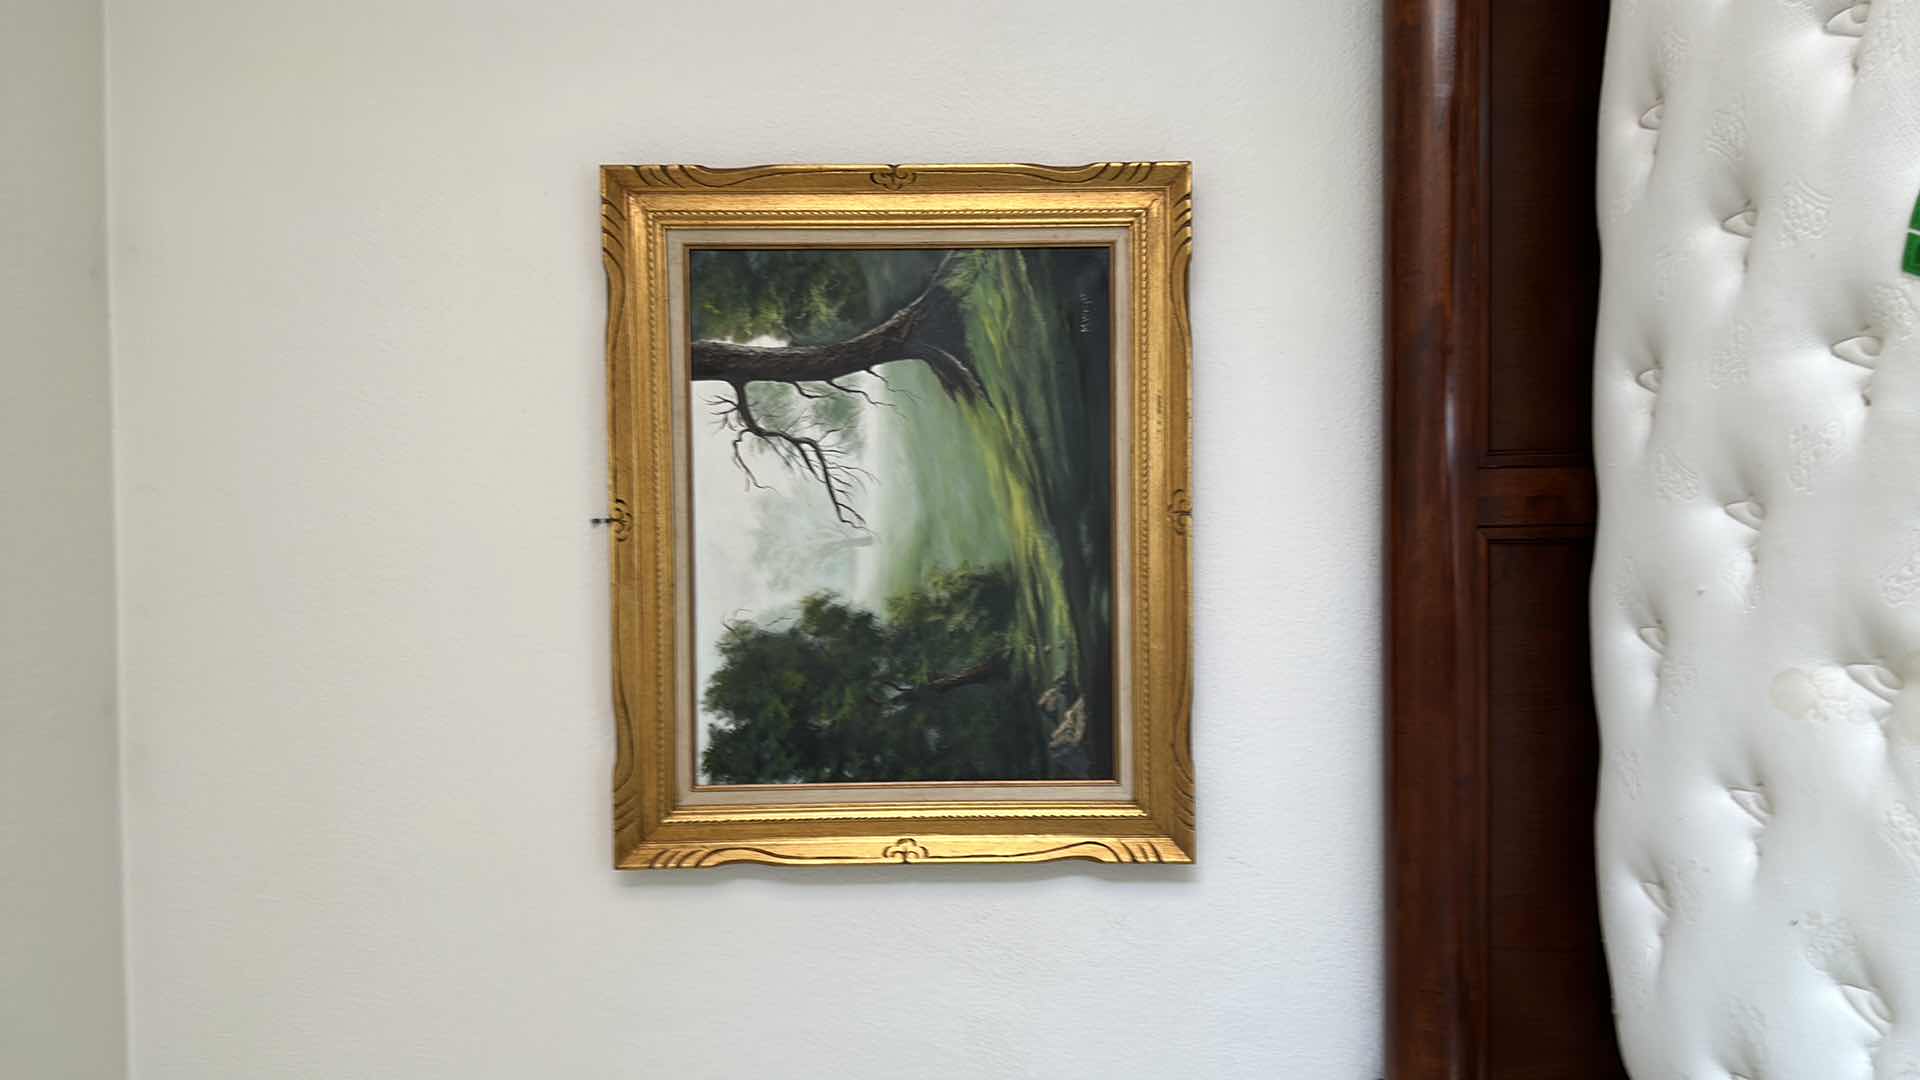 Photo 2 of FRAMED PAINTING OF TREES IN THE COUNTRY - SIGNED BY “M.WRIGHT” 35.5 x 30